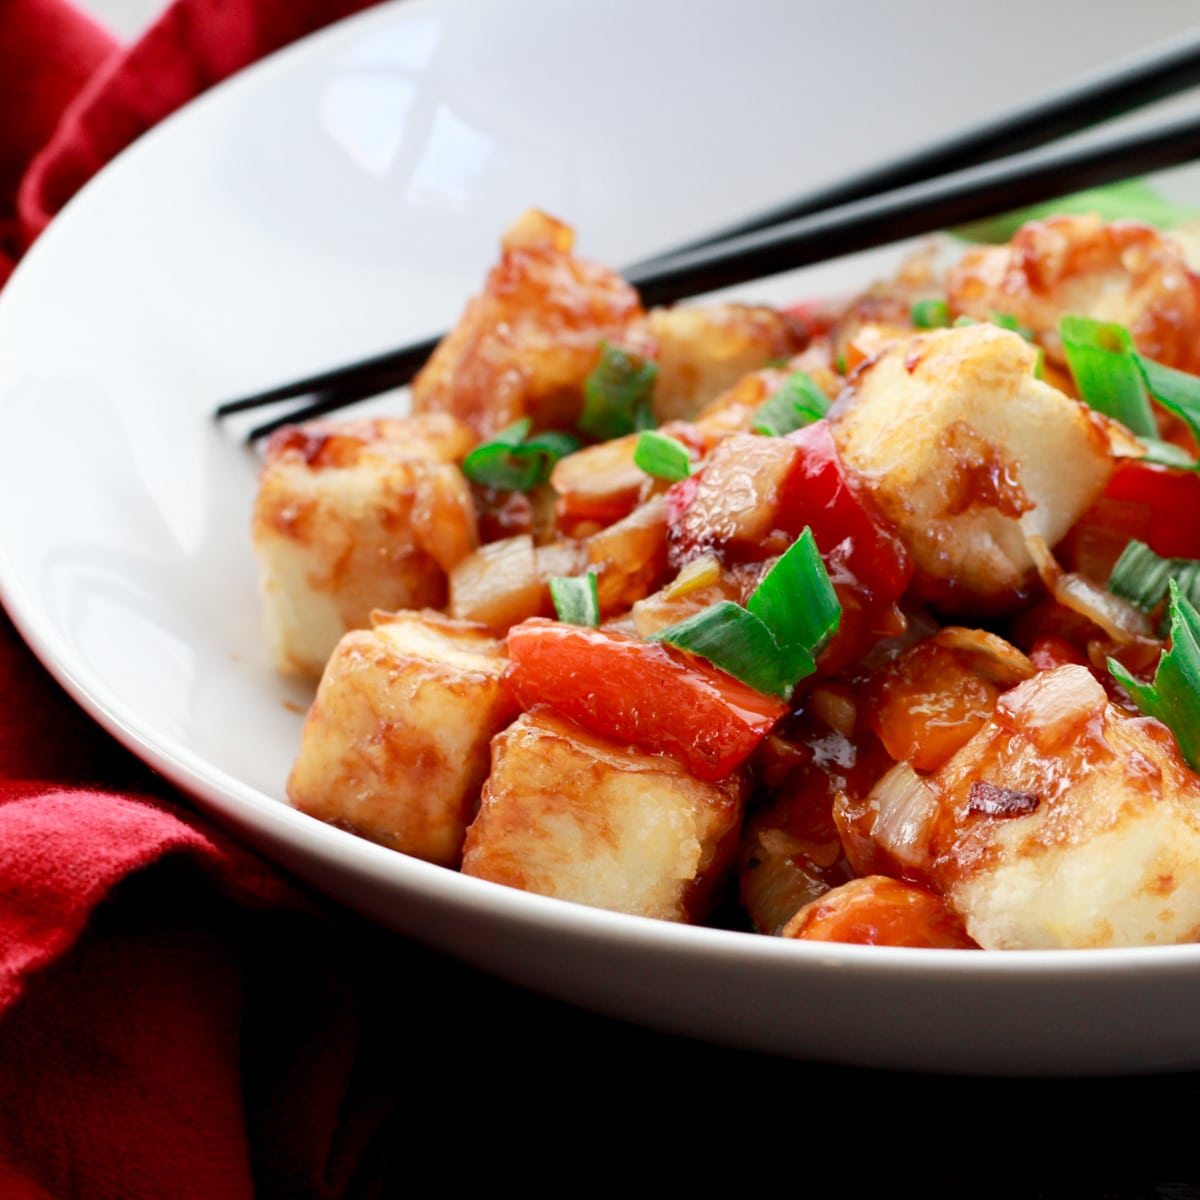 Crispy tofu cubes in a sweet and sour sauce on a round white plate with chopsticks, with a red napkin on the side.